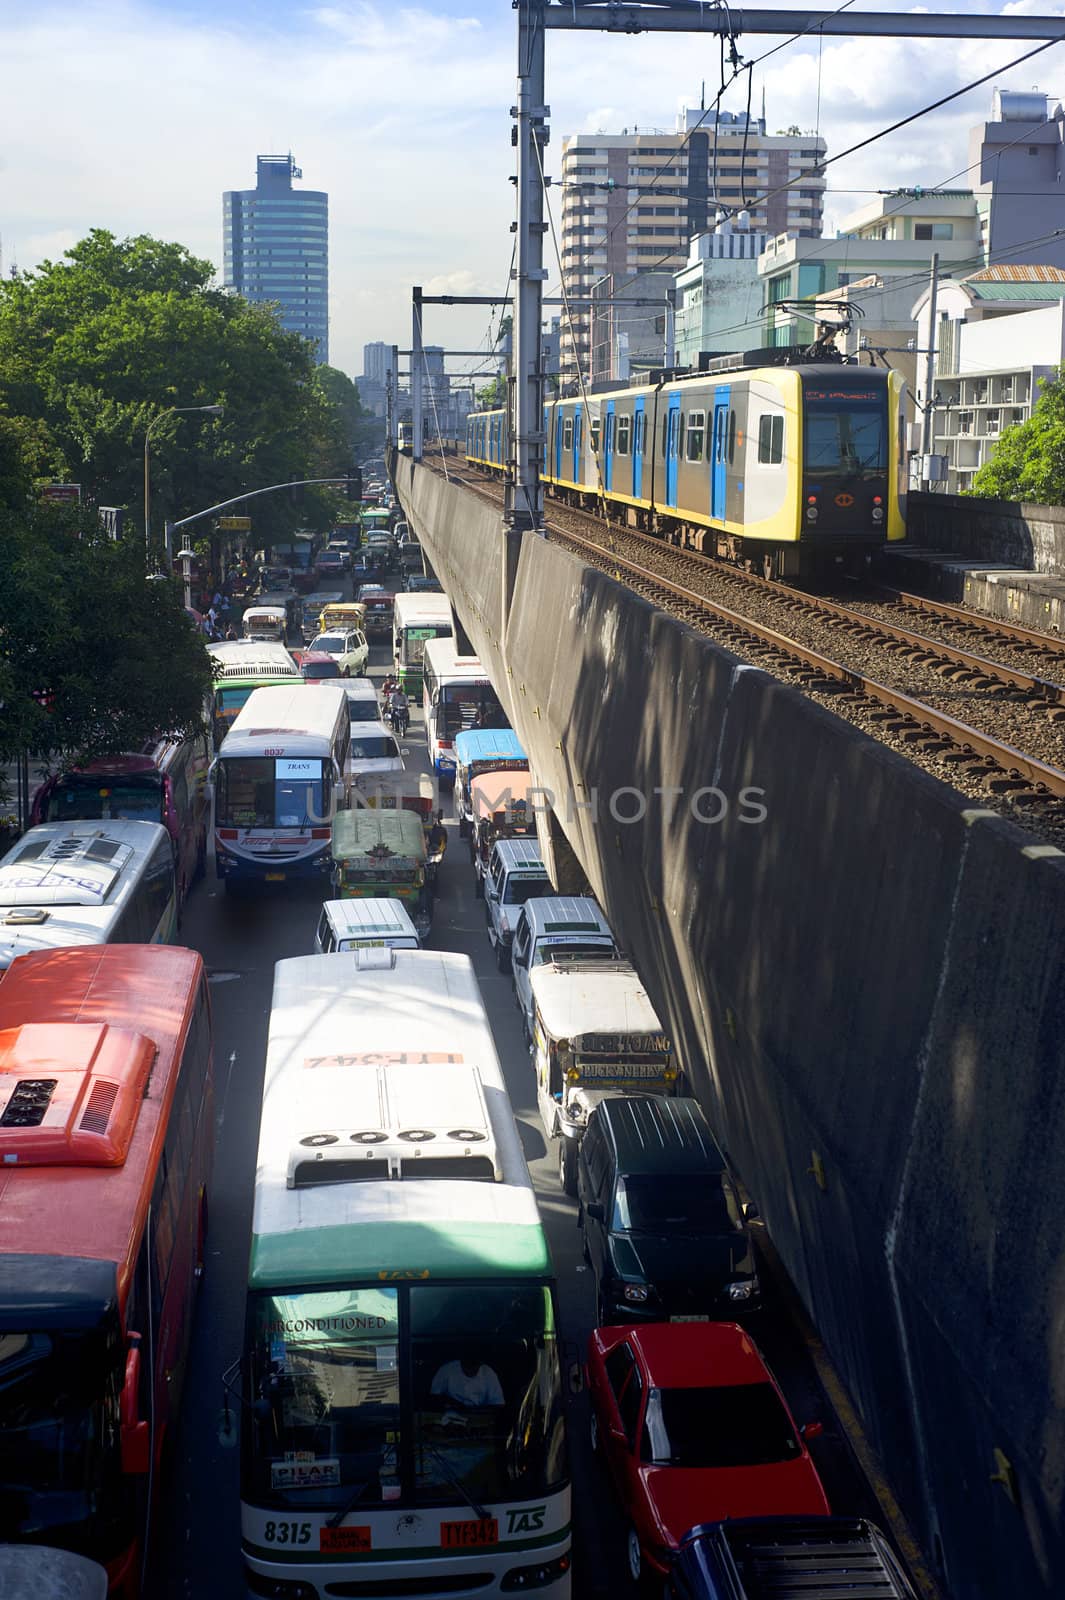 Manila, Philippines - April 02, 2012: LRT train arrives at a train station. LRT serves 579,000 passengers each day. Its 31 stations along over 31 kilometers (19 mi) of mostly elevated track form two lines